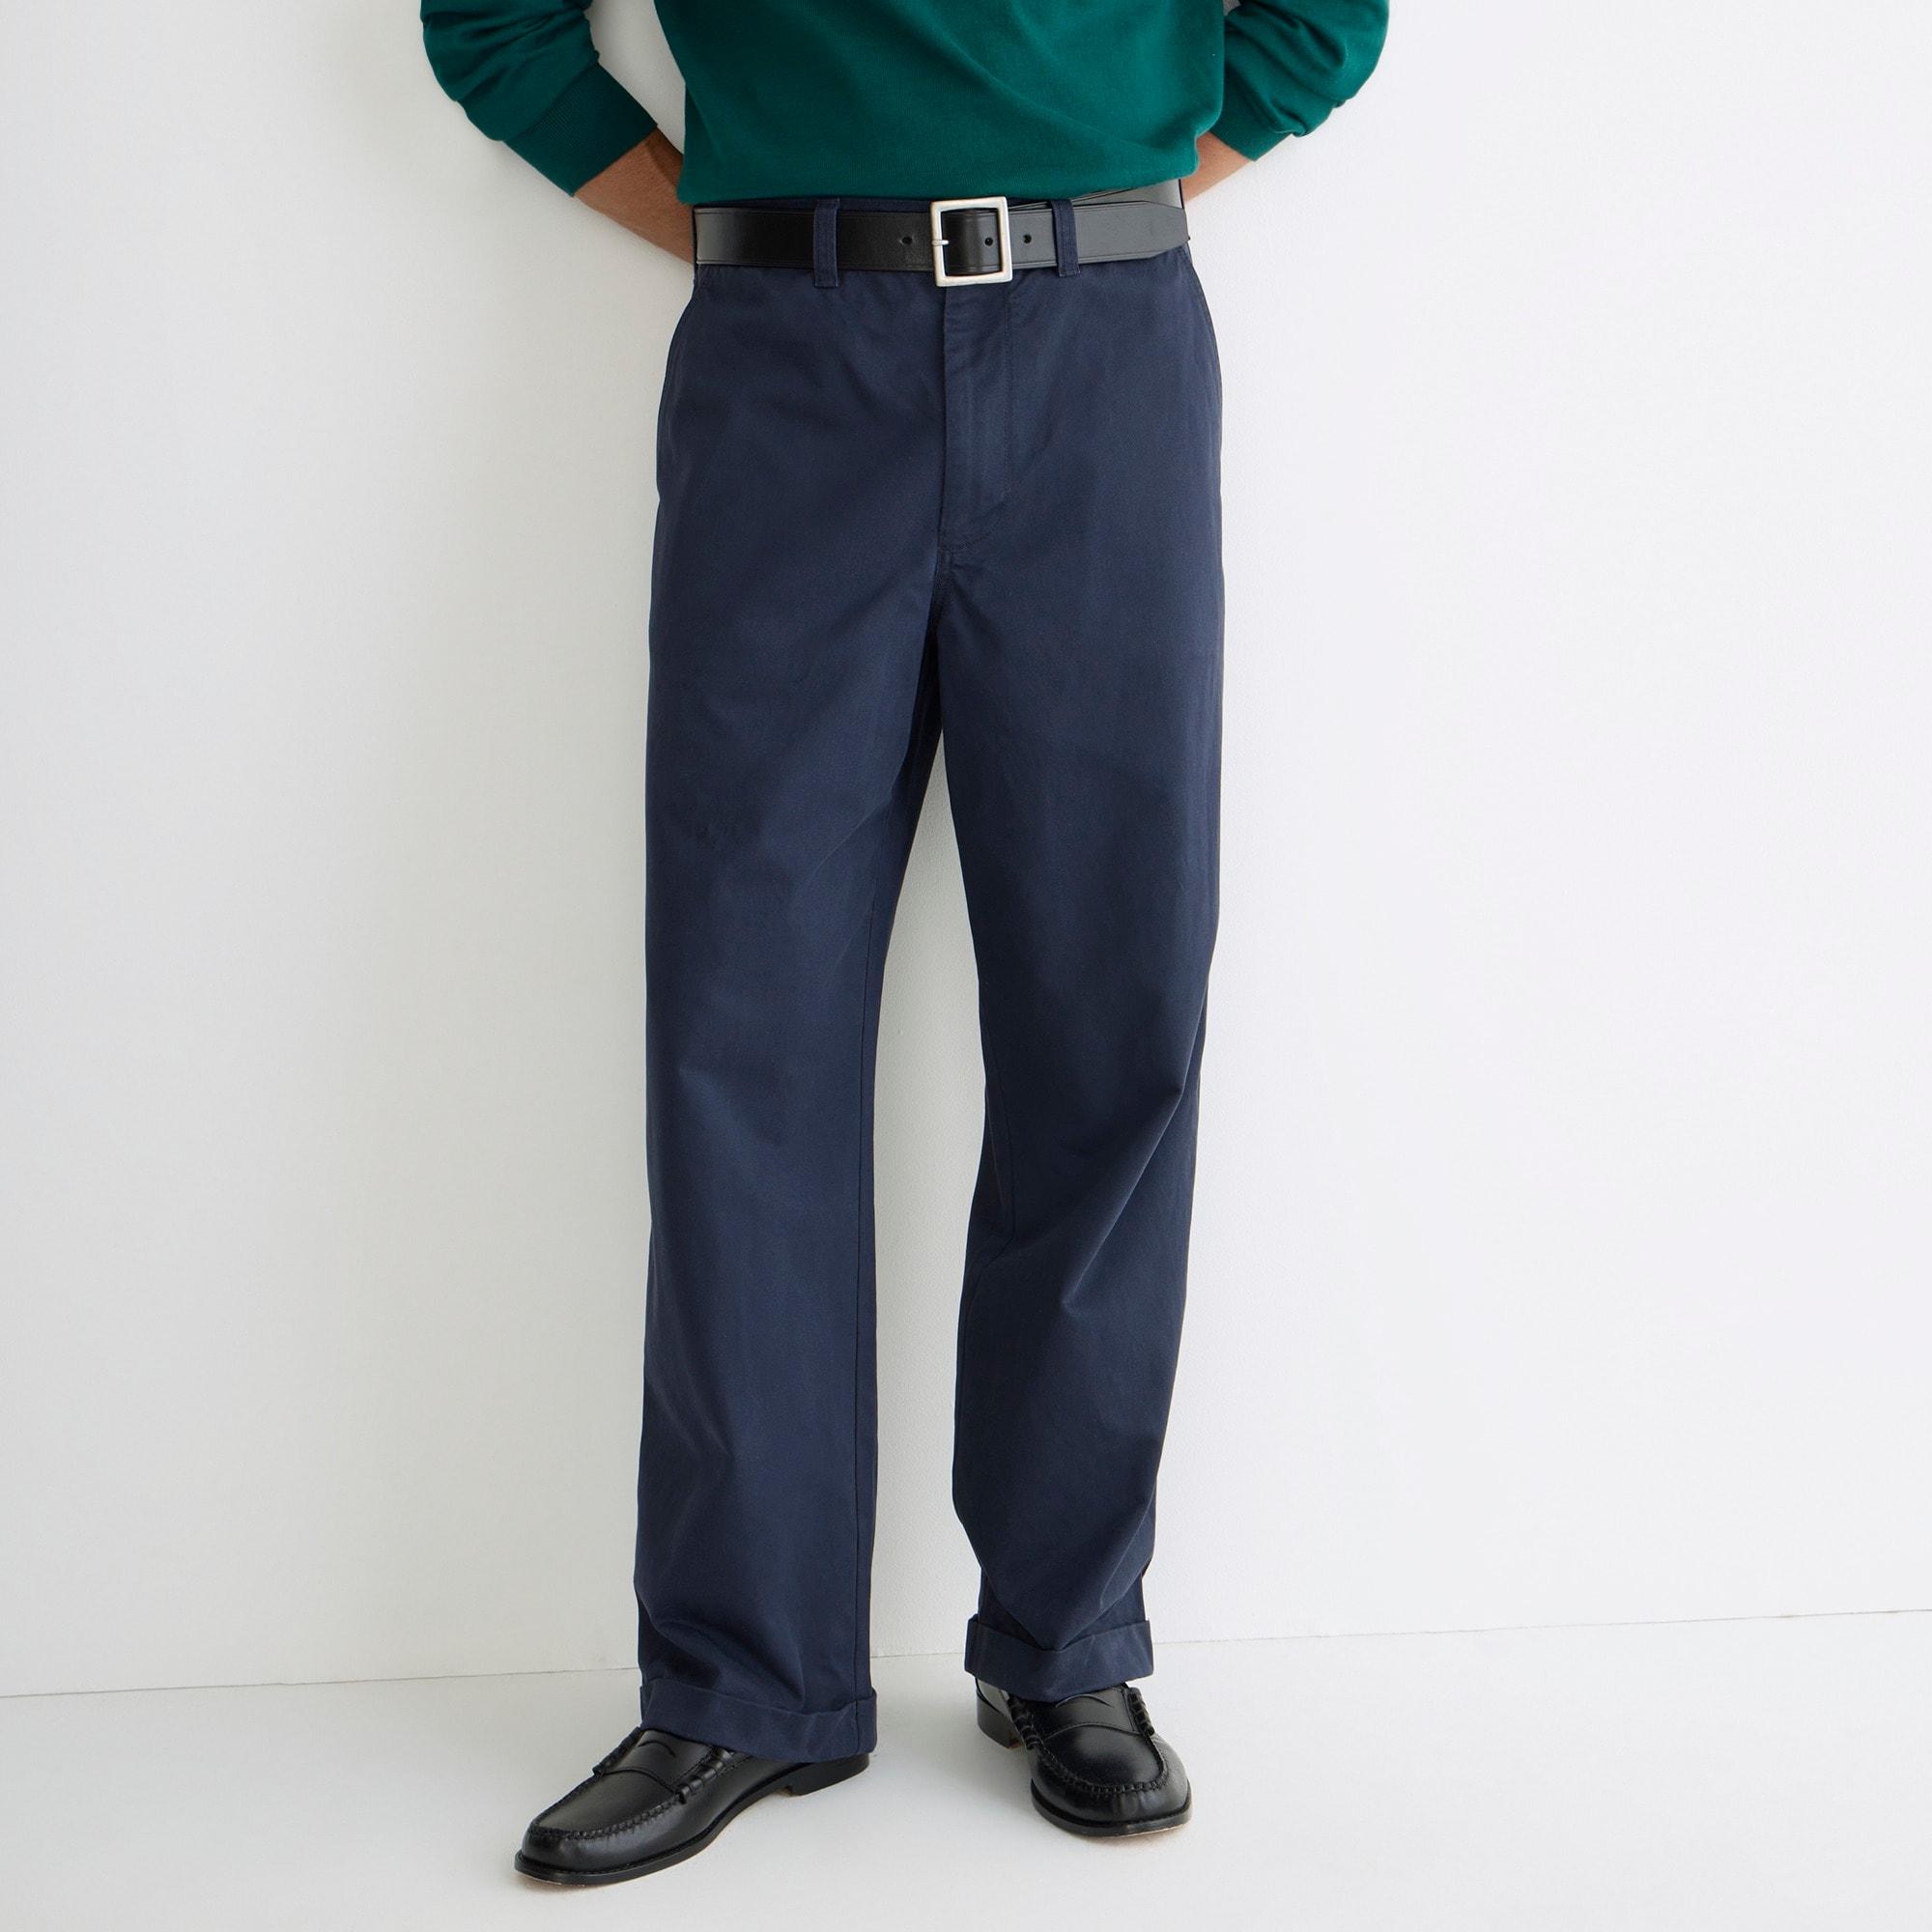 Jcrew Giant-fit chino pant